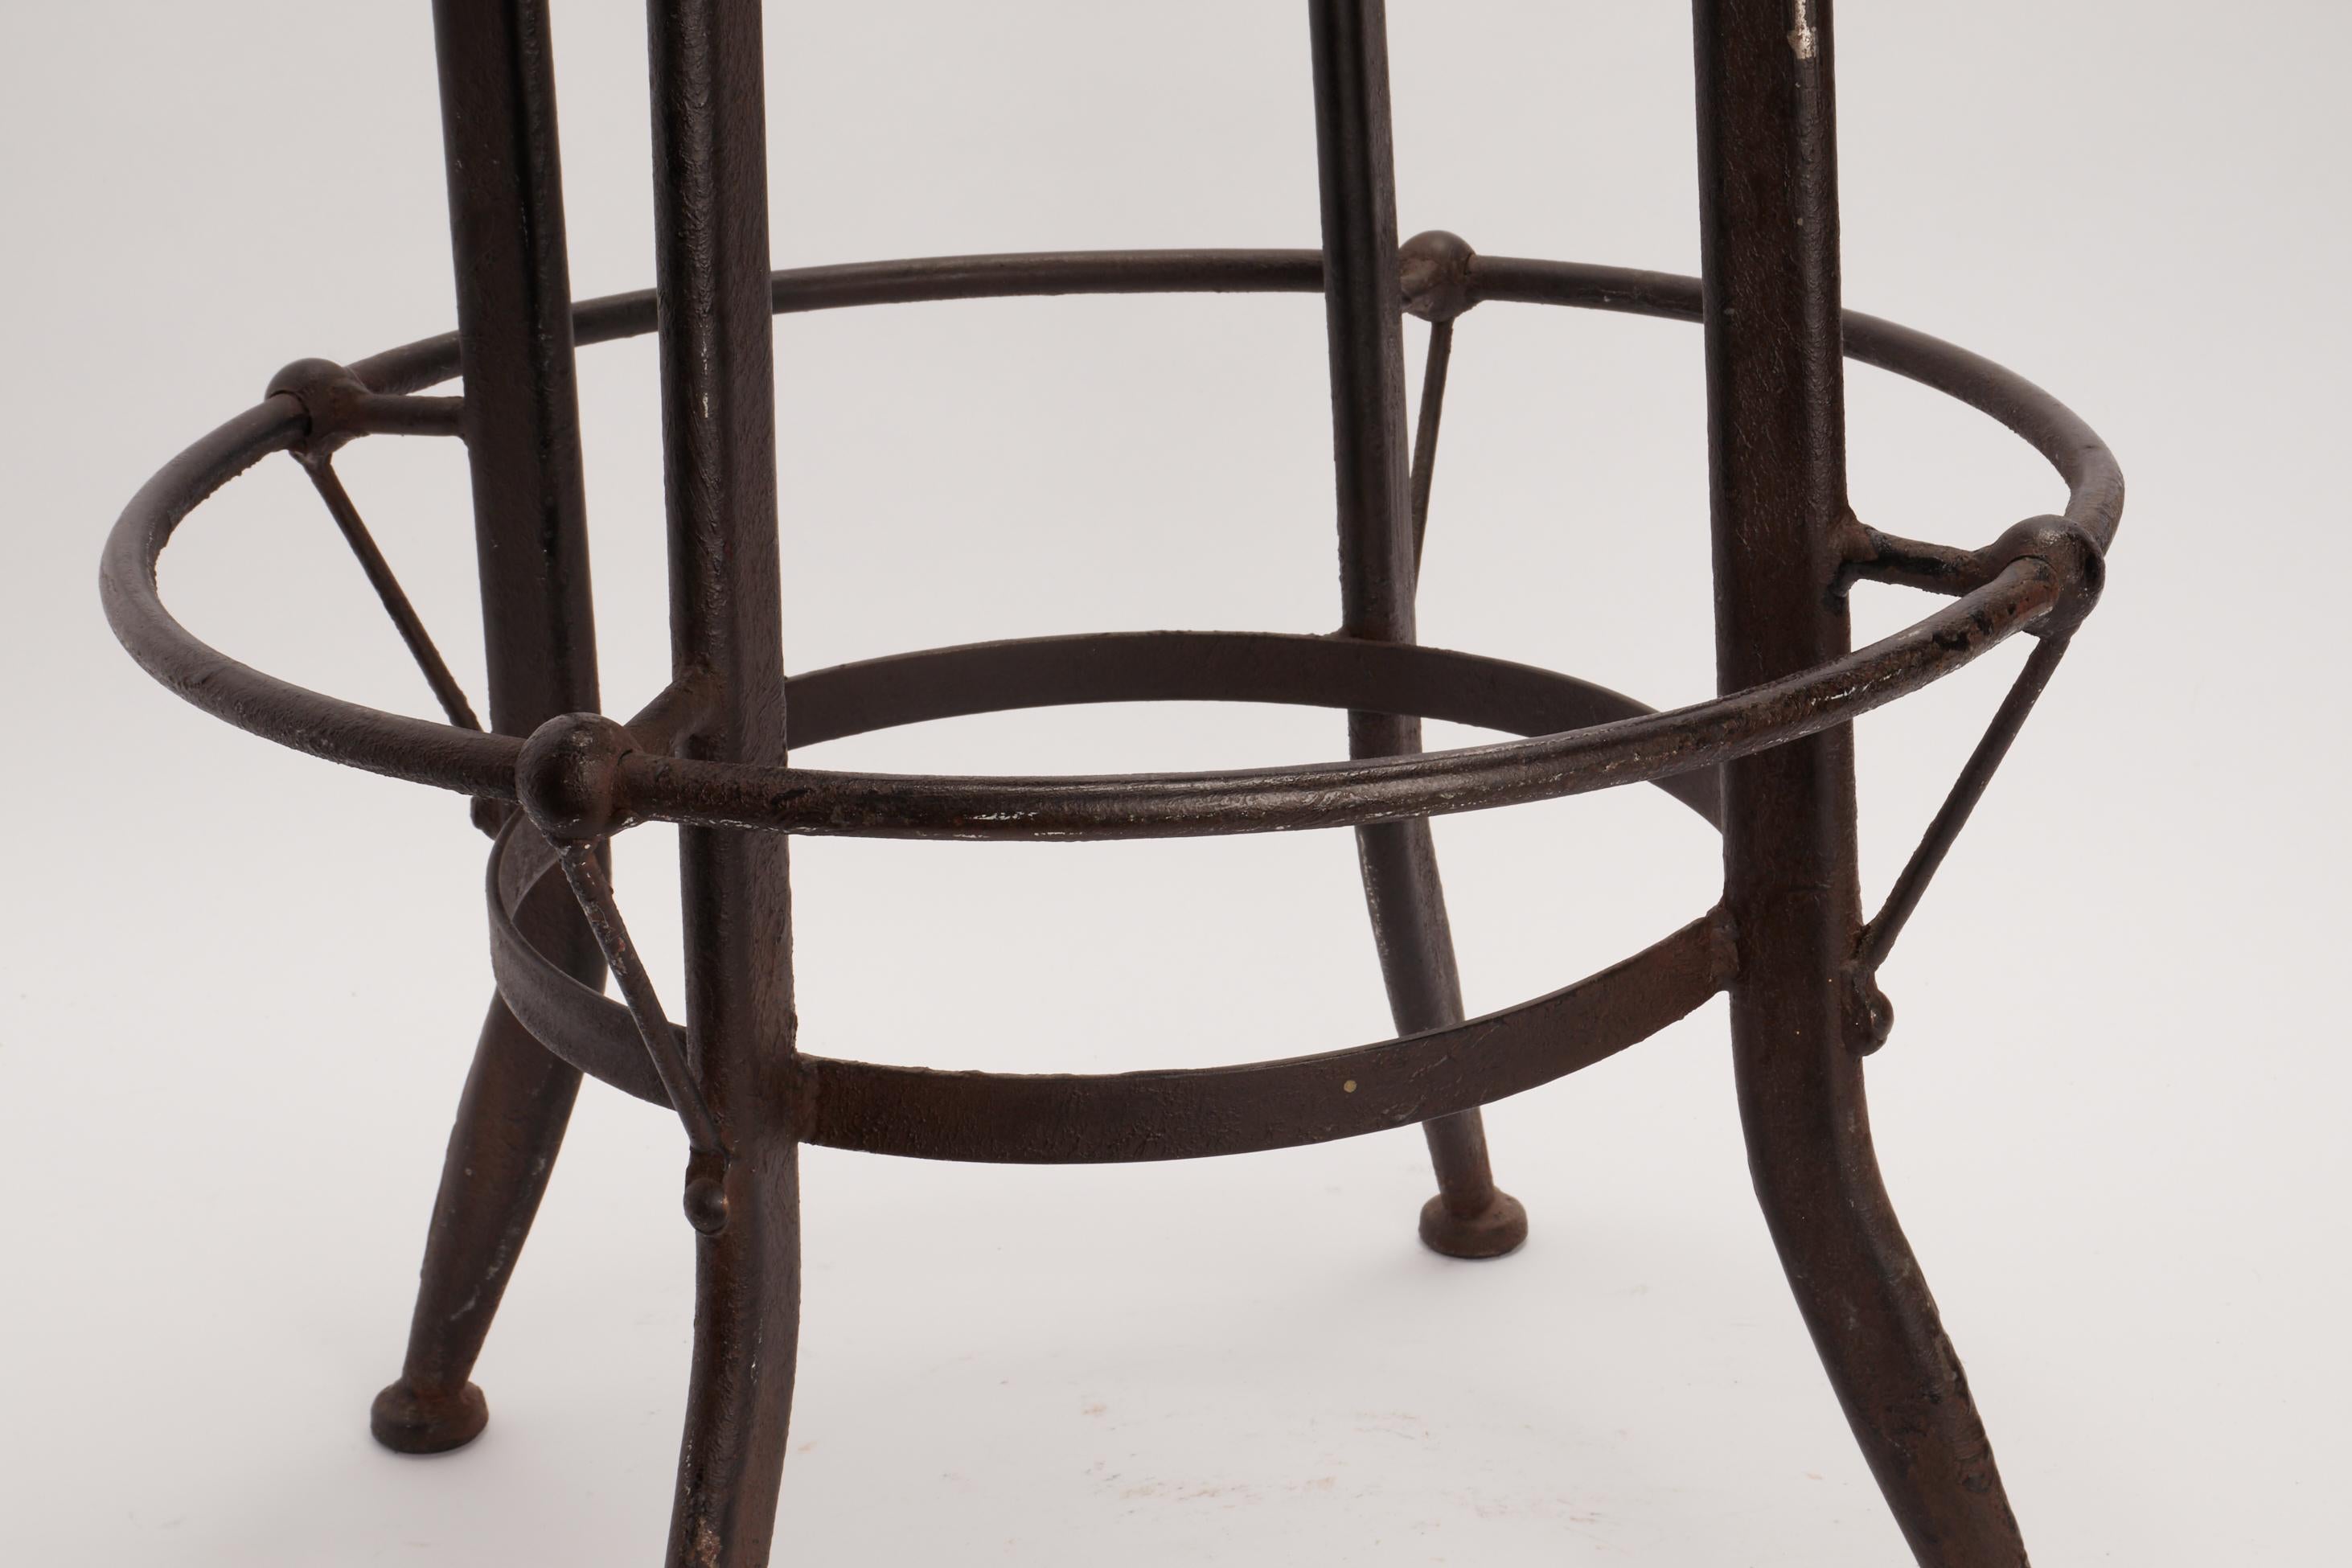 Iron Pair of Industrial Stools and Wooden Seats, Italy, 1930 For Sale